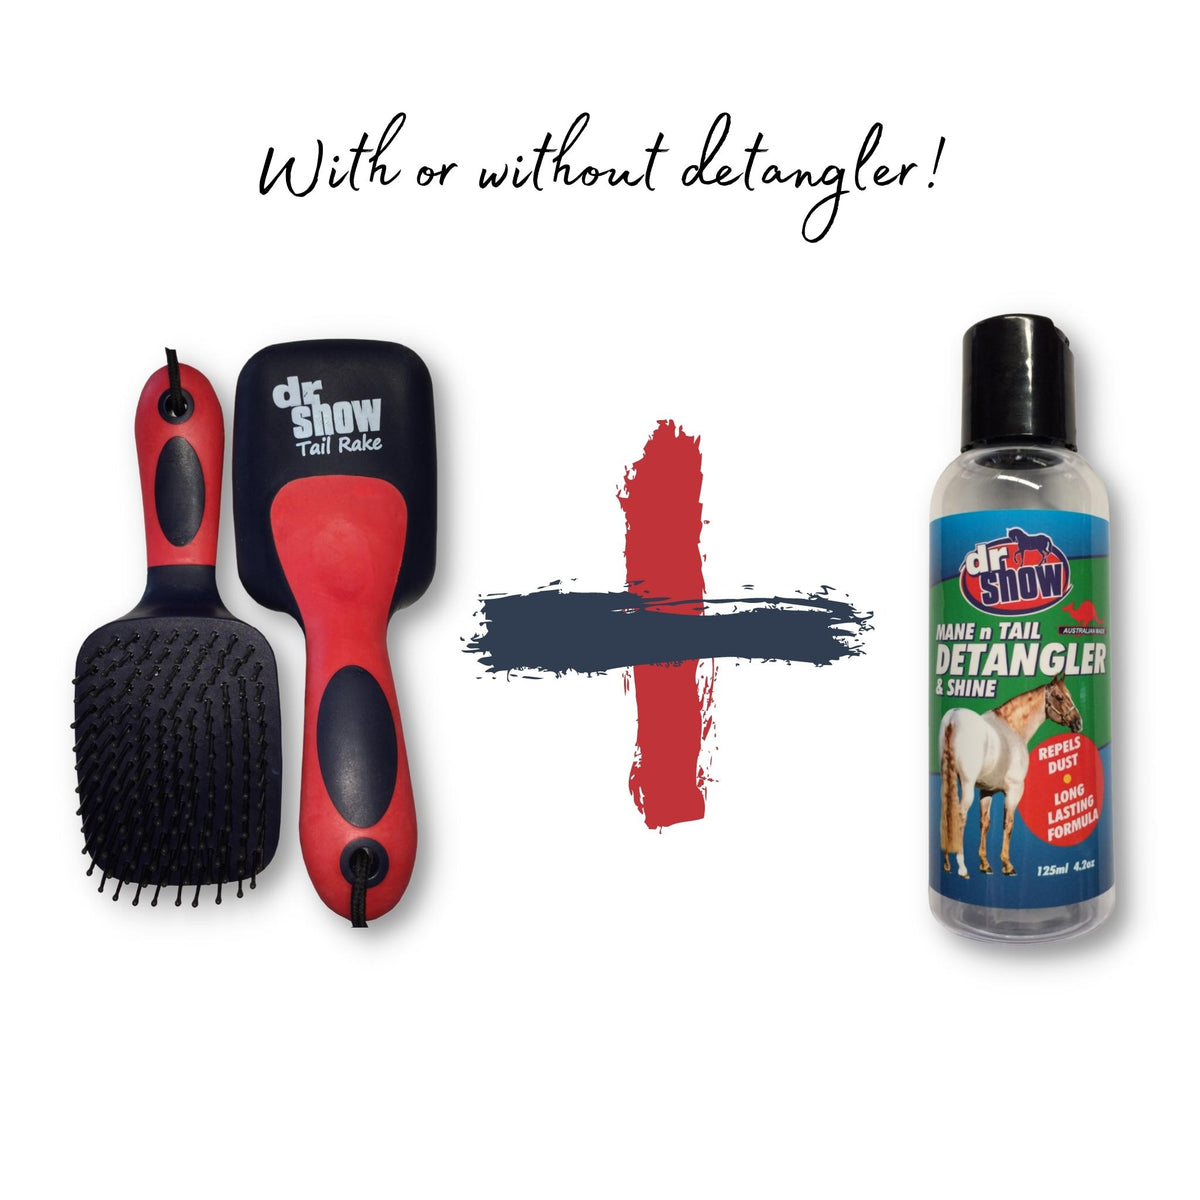 Tail brush and detangler bottle pictured with addition symbol between them.